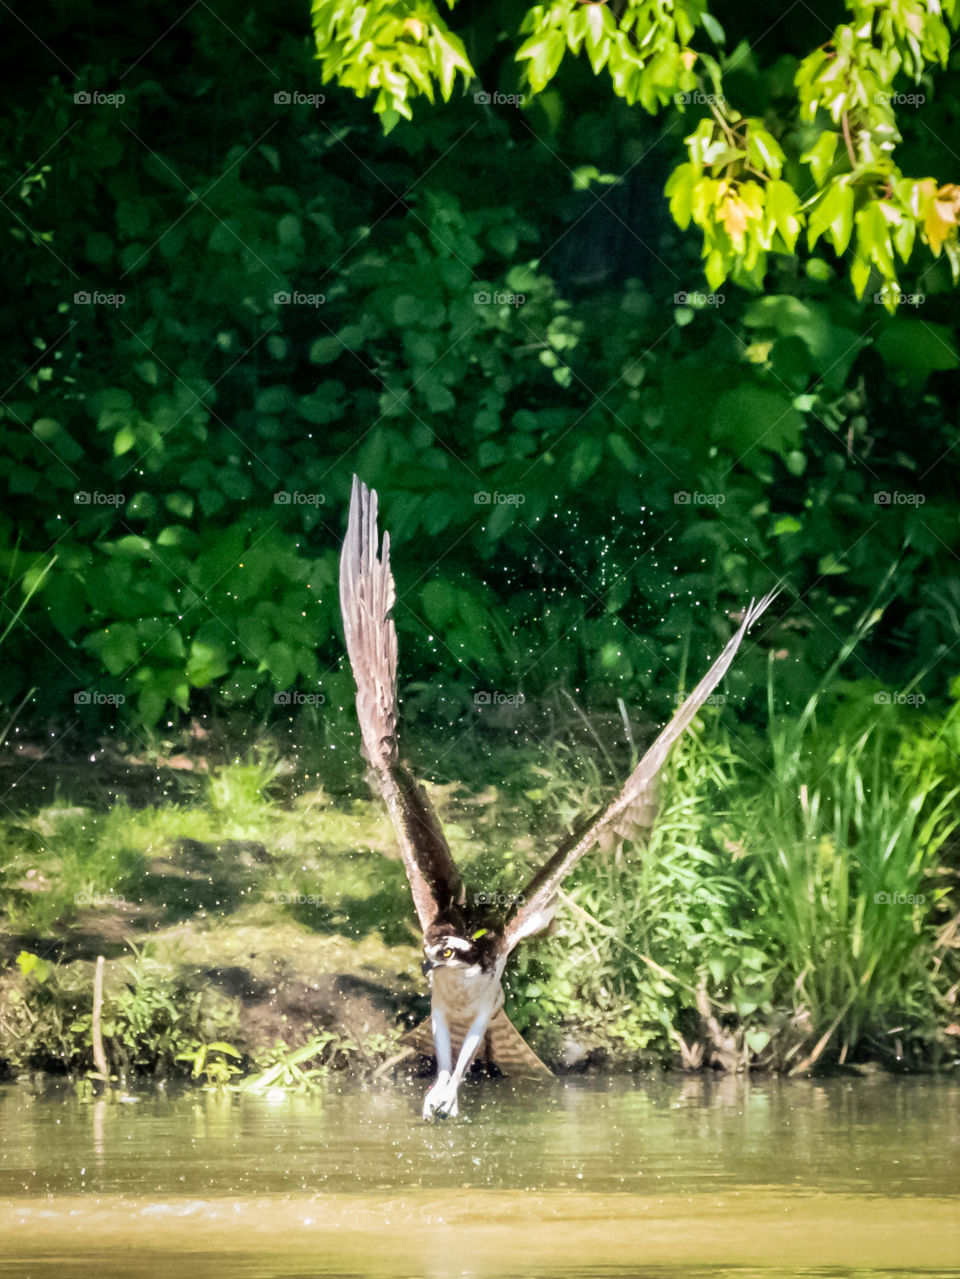 Animals in the Wild - An osprey went in for a catch and came up empty.